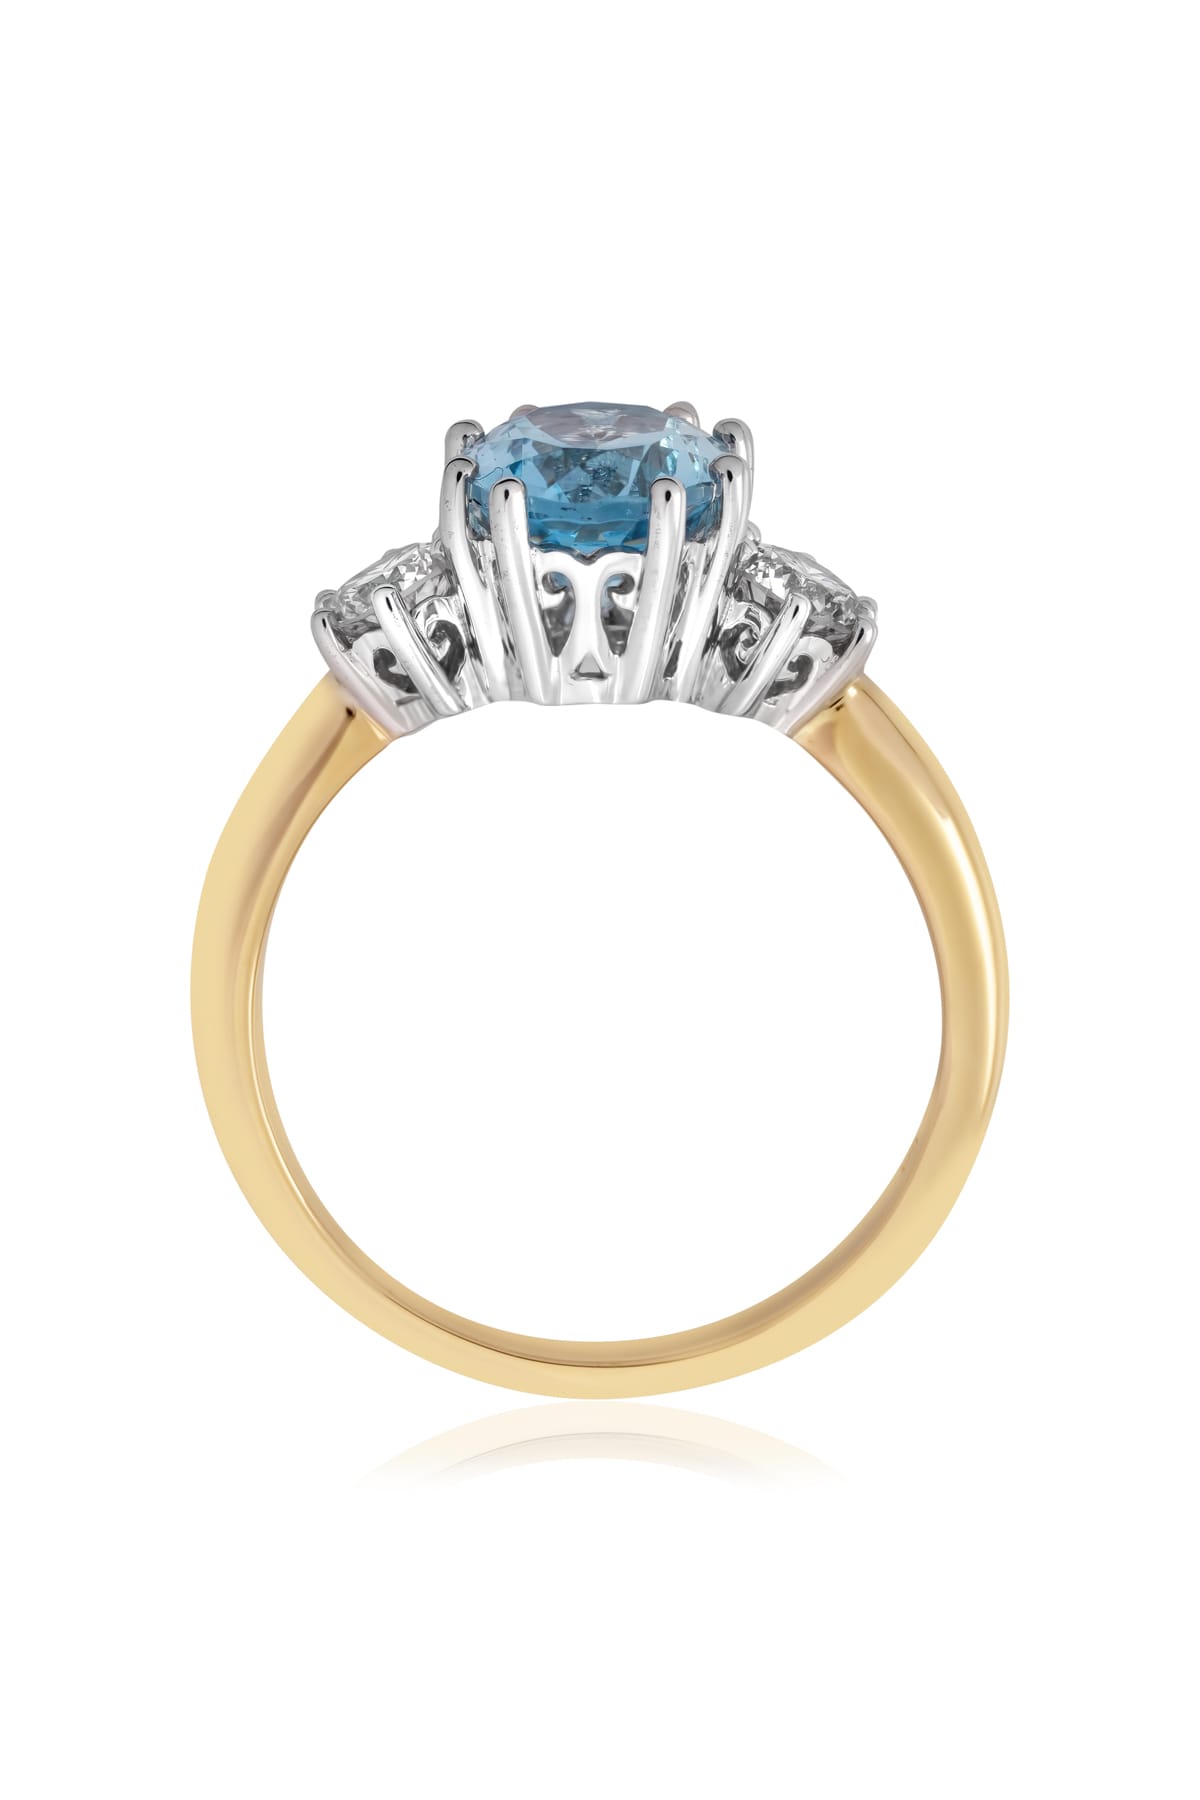 1.47ct Oval Aquamarine And Diamond 3-Stone Ring from LeGassick.